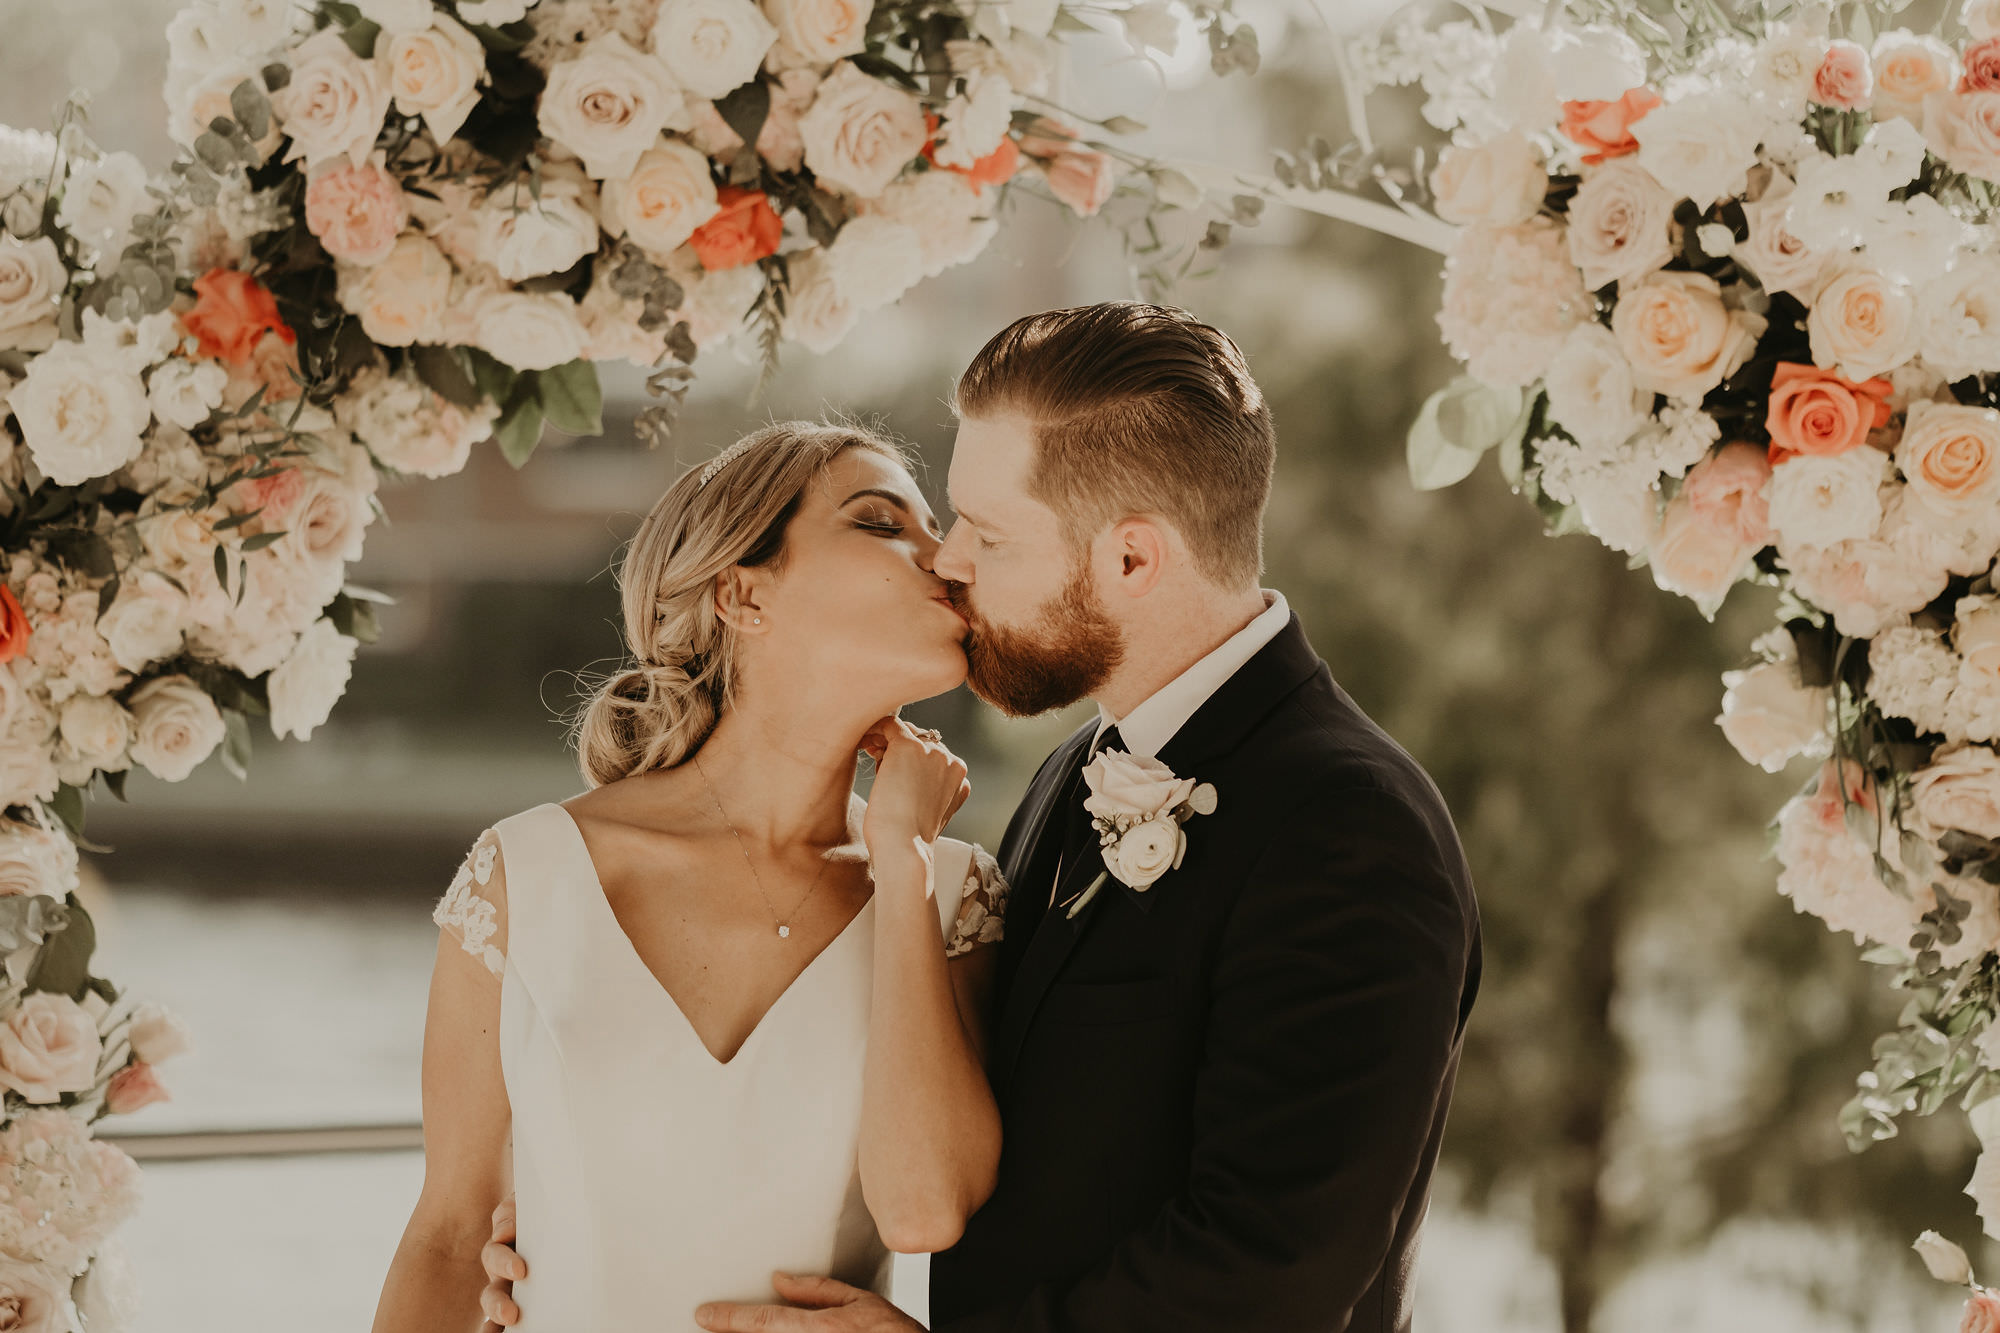 Outdoor Bride and Groom Portrait Kiss in front of Floral Arrangement with Peach Salmon Coral Roses White Hydrangea and Eucalyptus Greenery